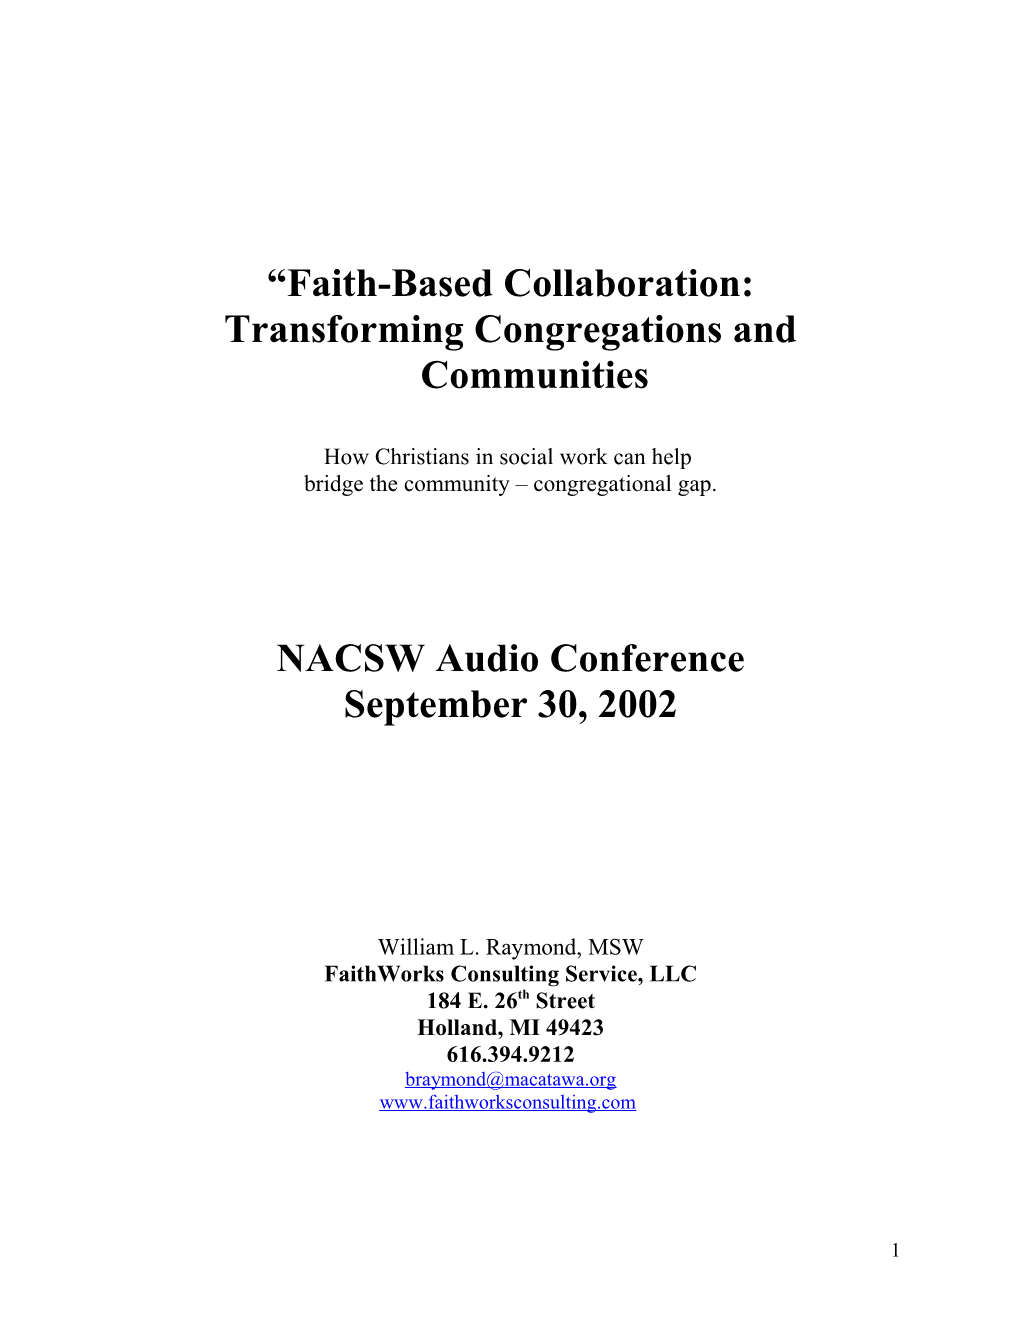 Transforming Congregations and Communities